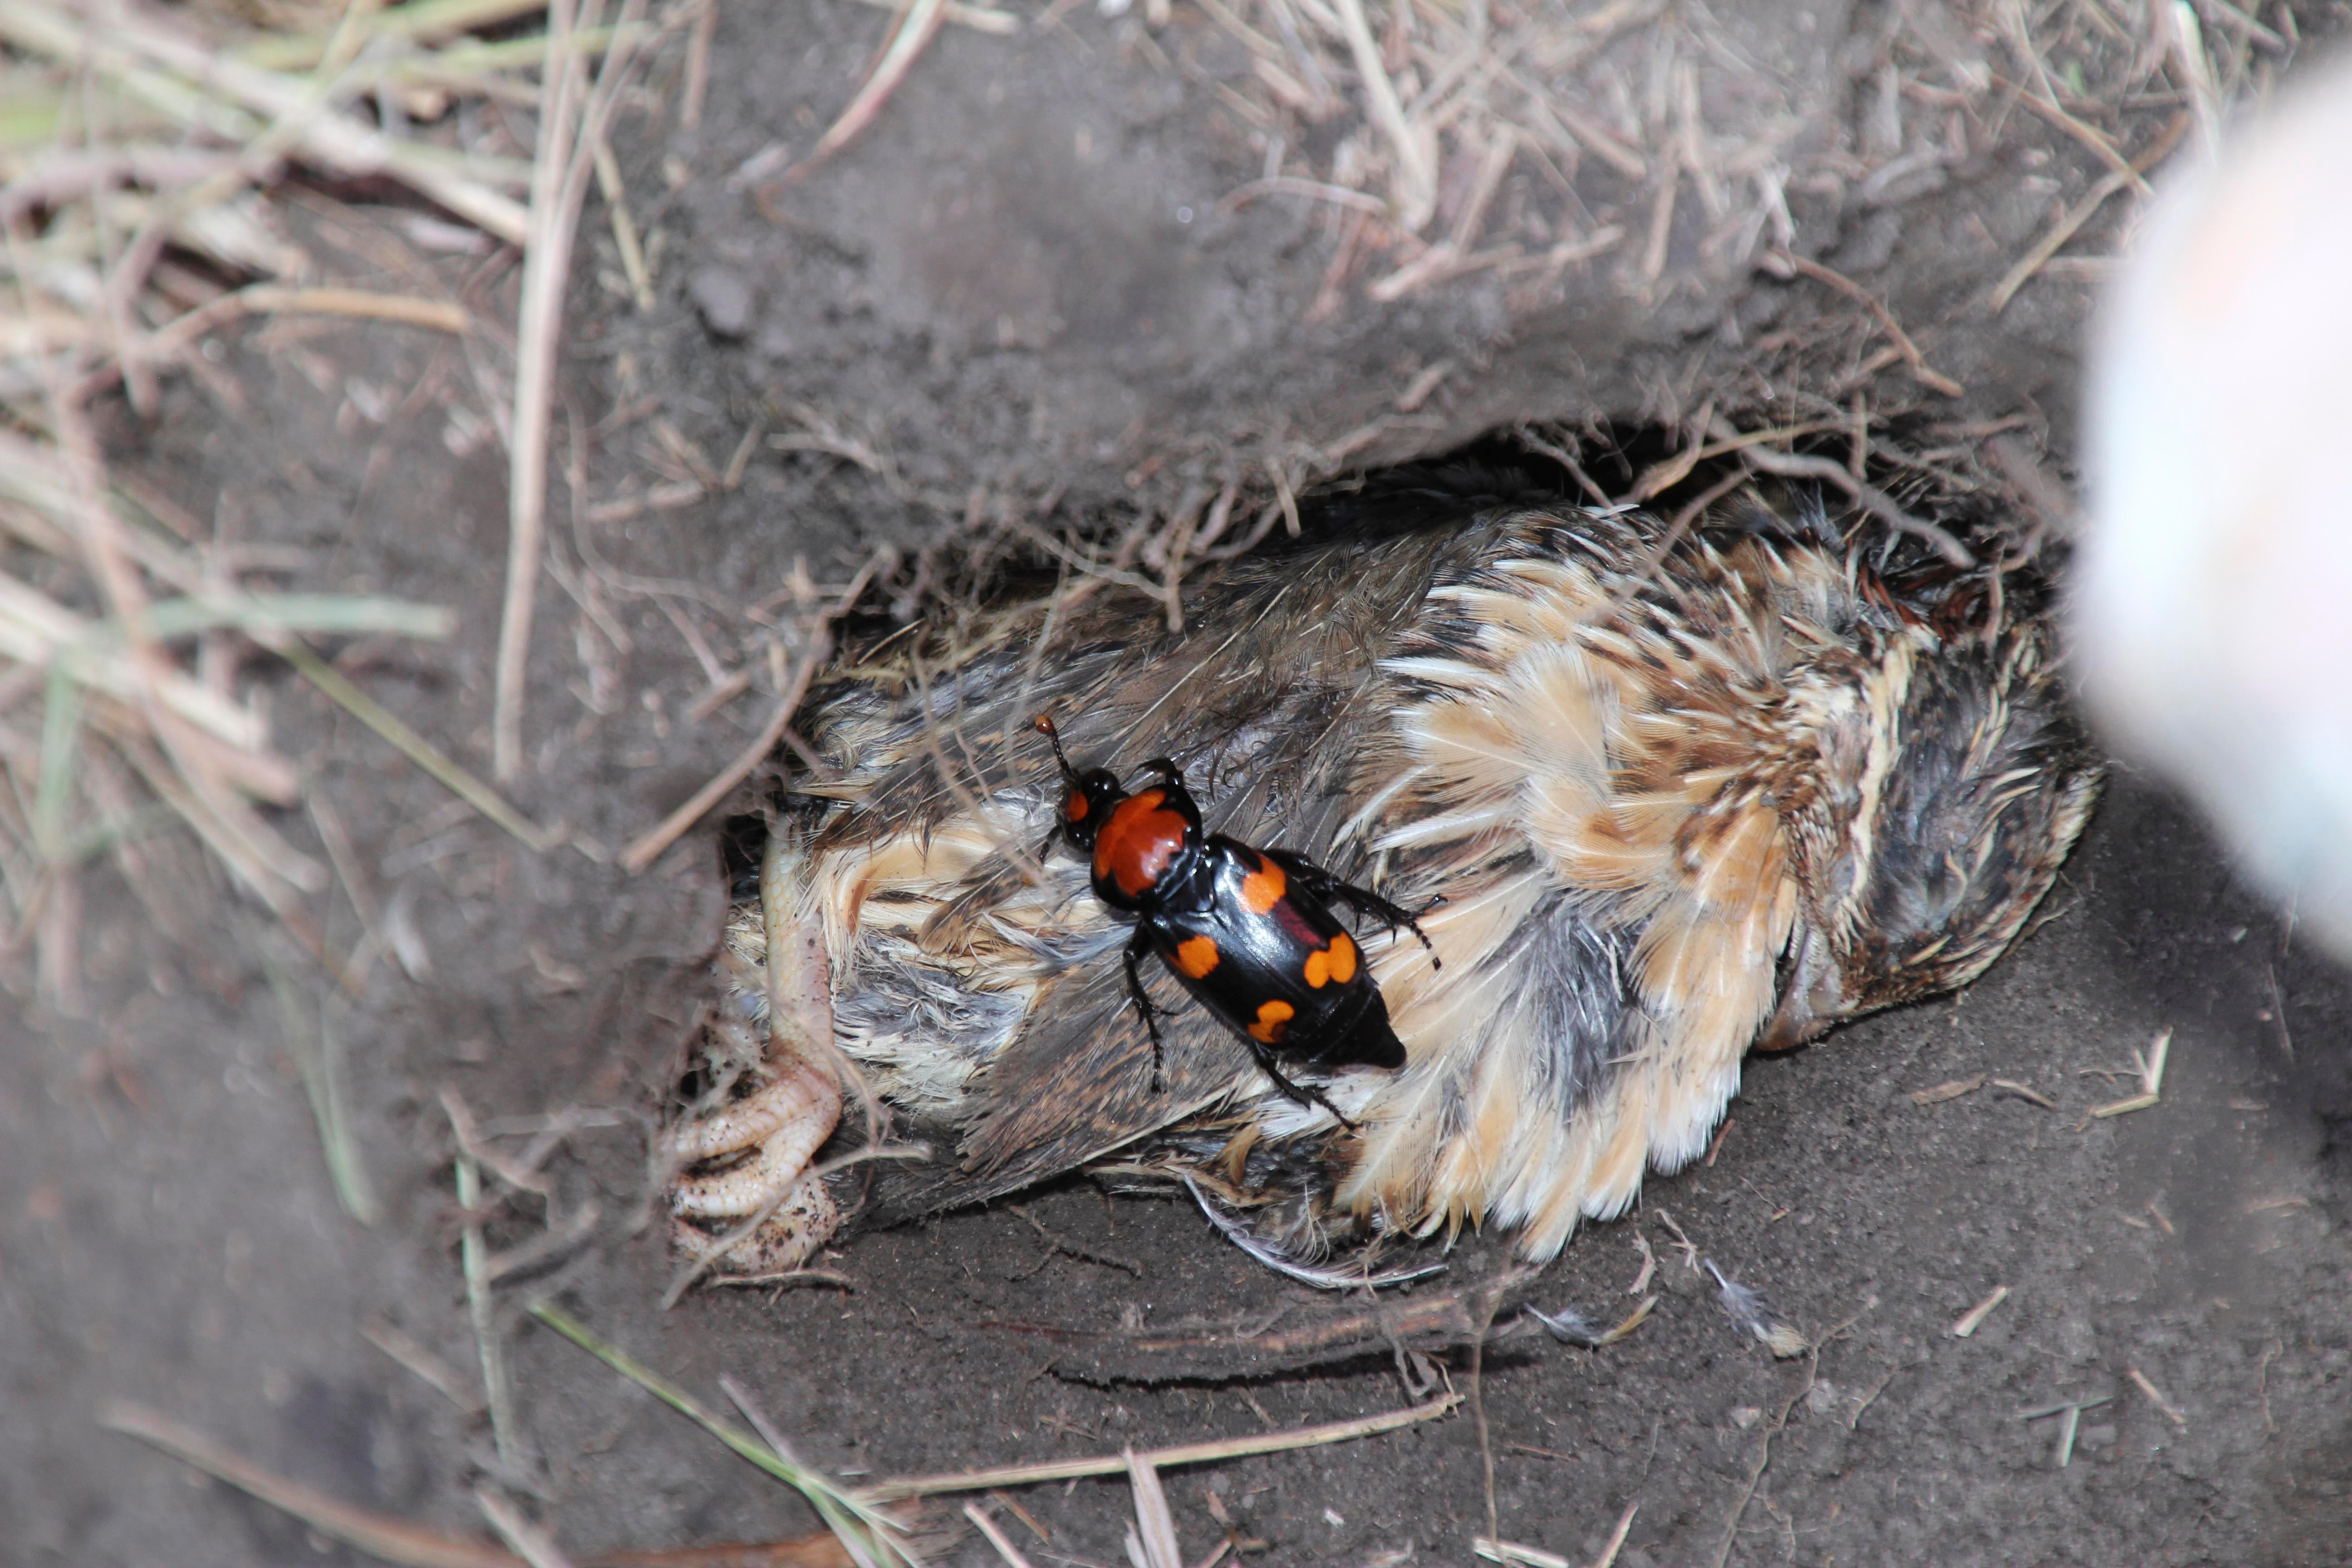 A striking red-and-black burying beetle finds a new home in Missouri soil.